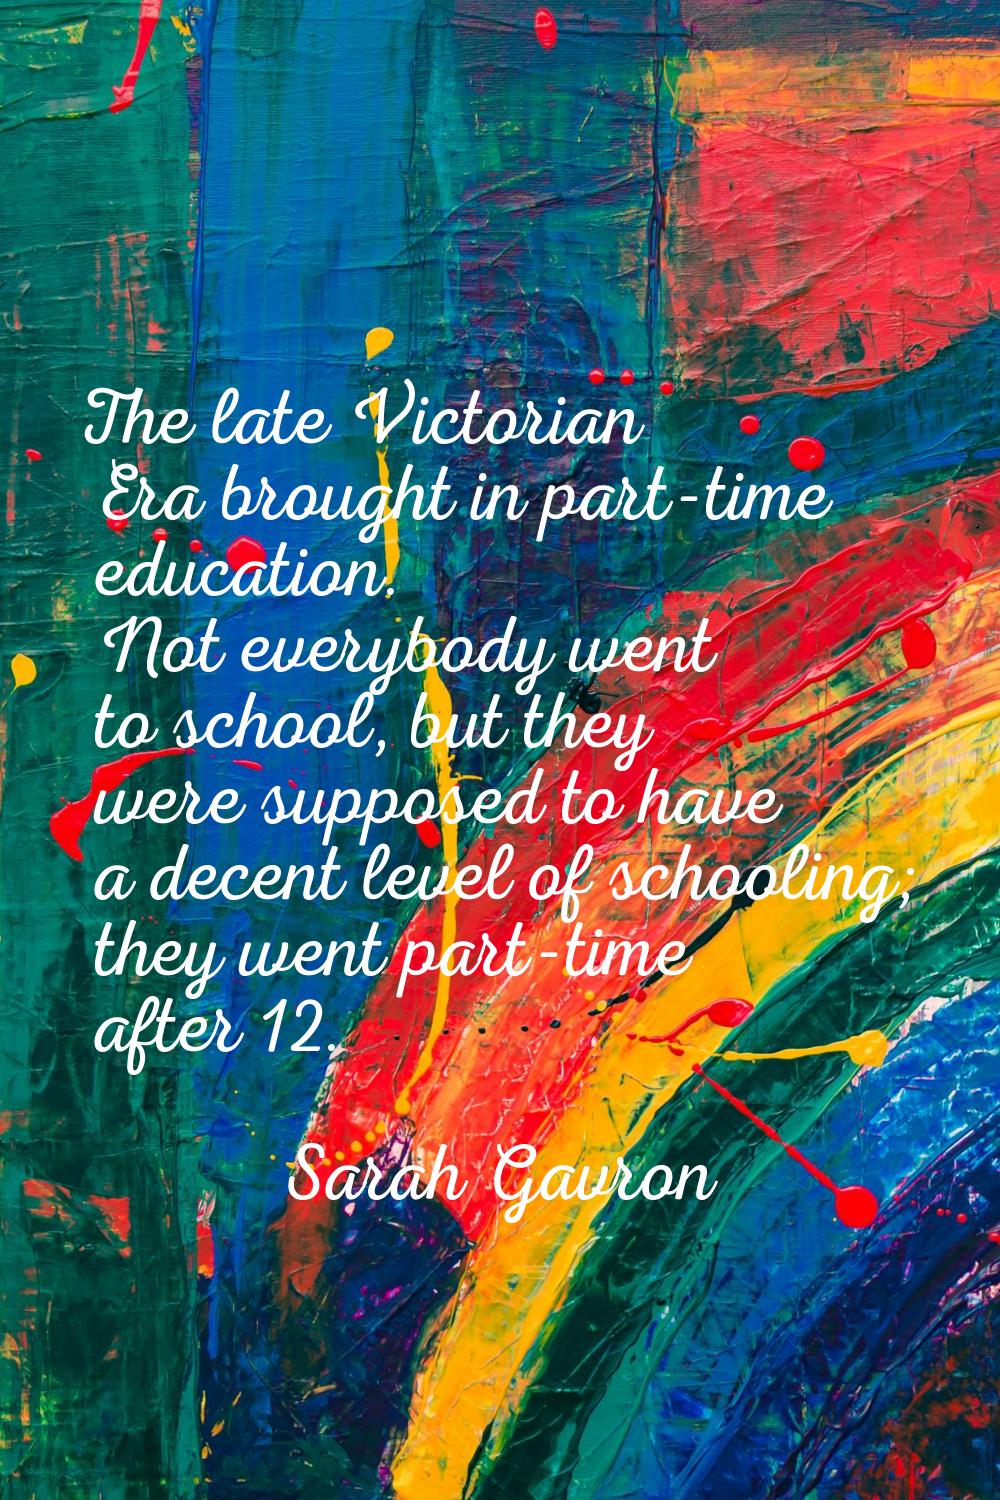 The late Victorian Era brought in part-time education. Not everybody went to school, but they were 